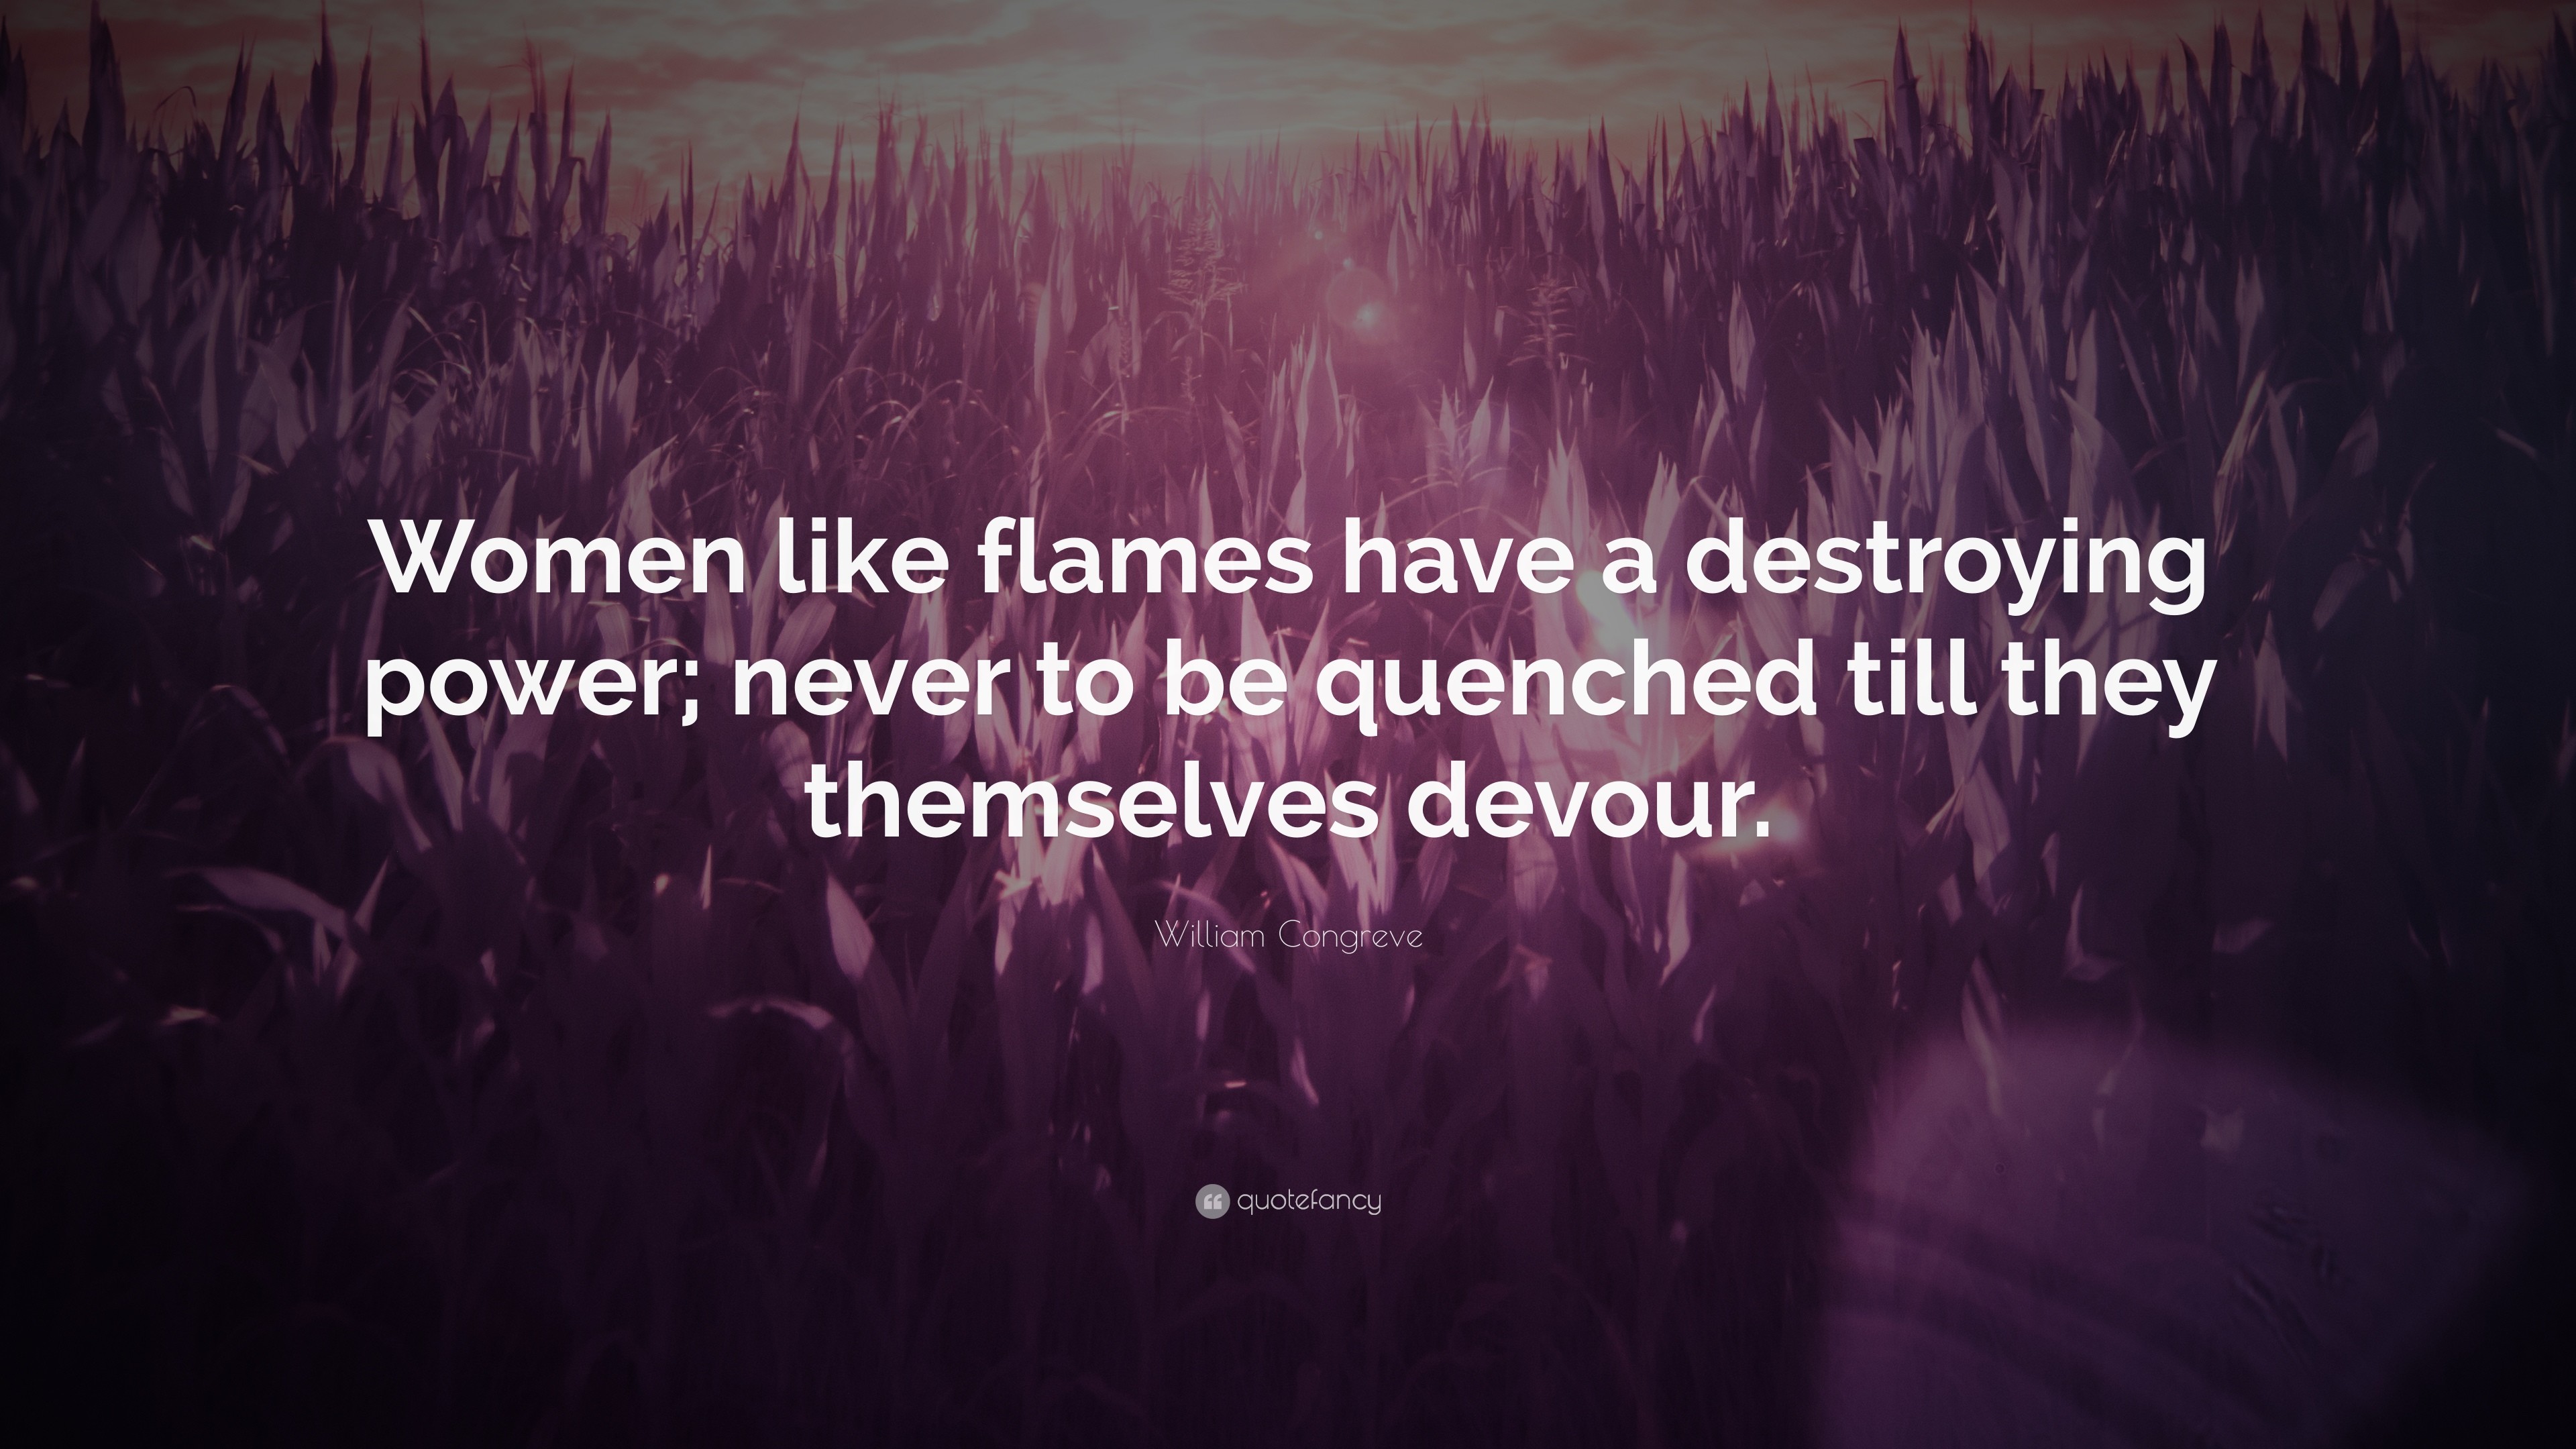 3840x2160 William Congreve Quote: “Women like flames have a destroying power; never  to be